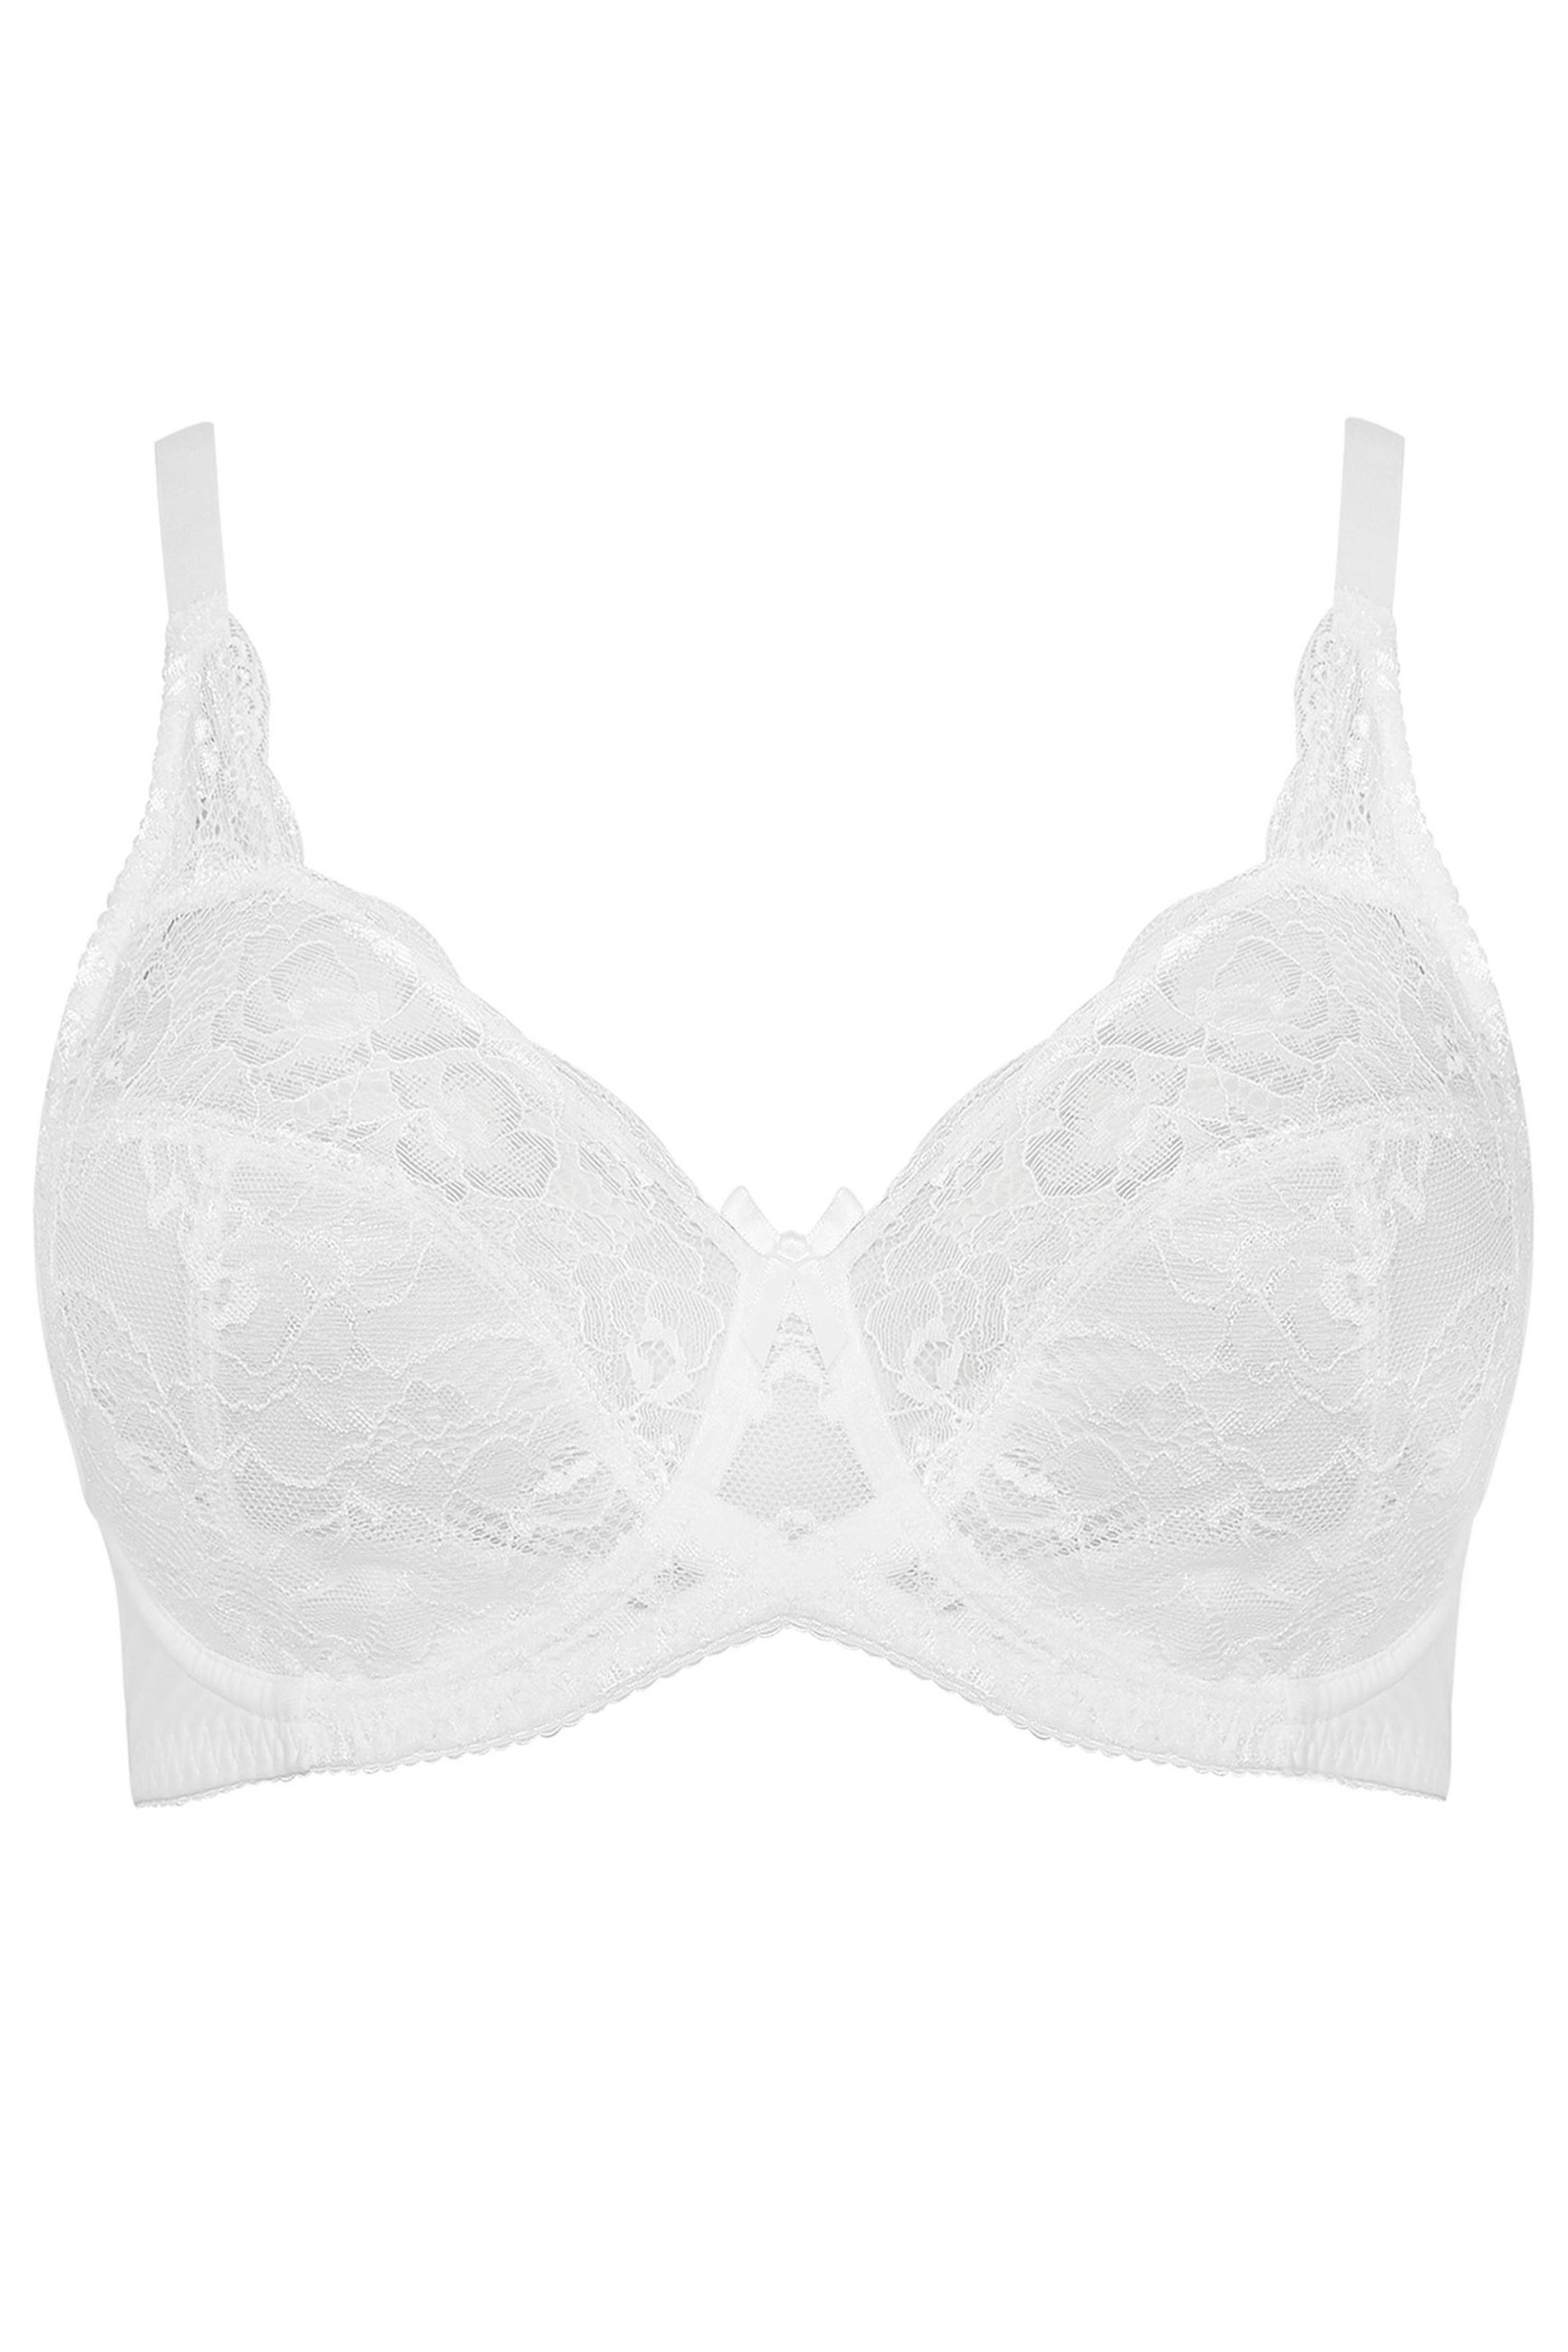 Yours 2 Pack Stretch Lace UW Bra